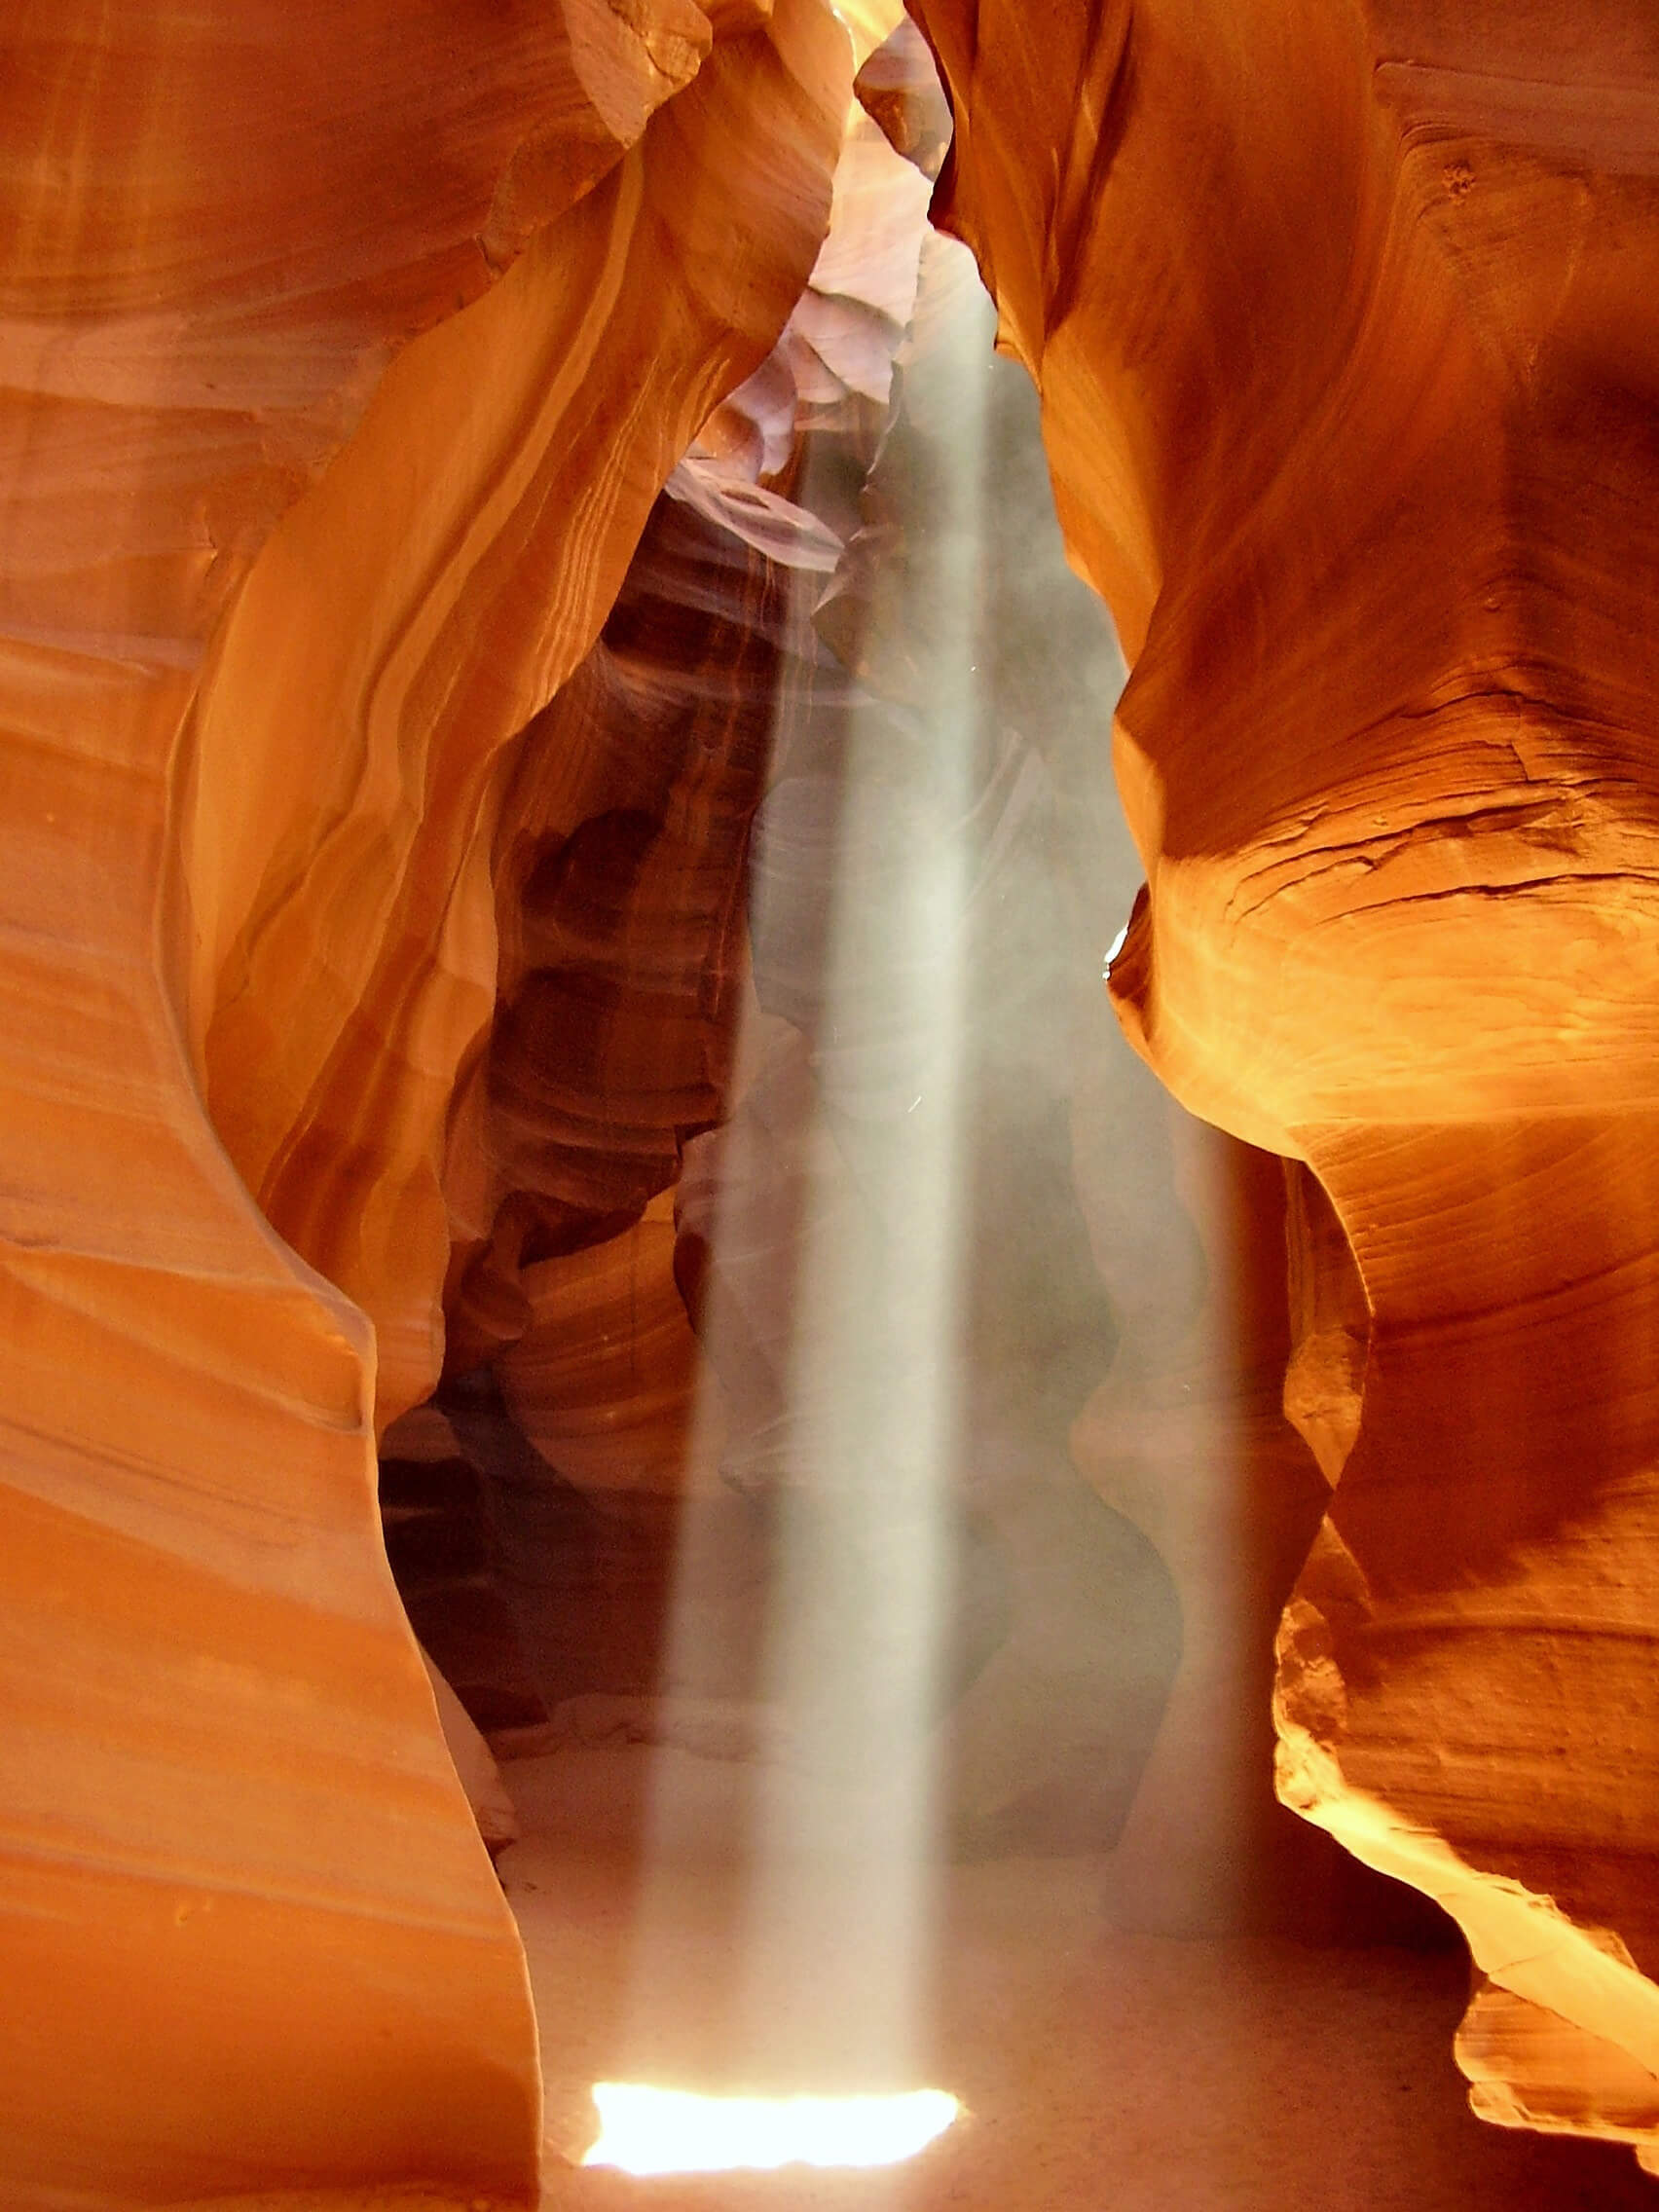 large light beam between two auburn rock formations. - iPhone camera antelope canyon